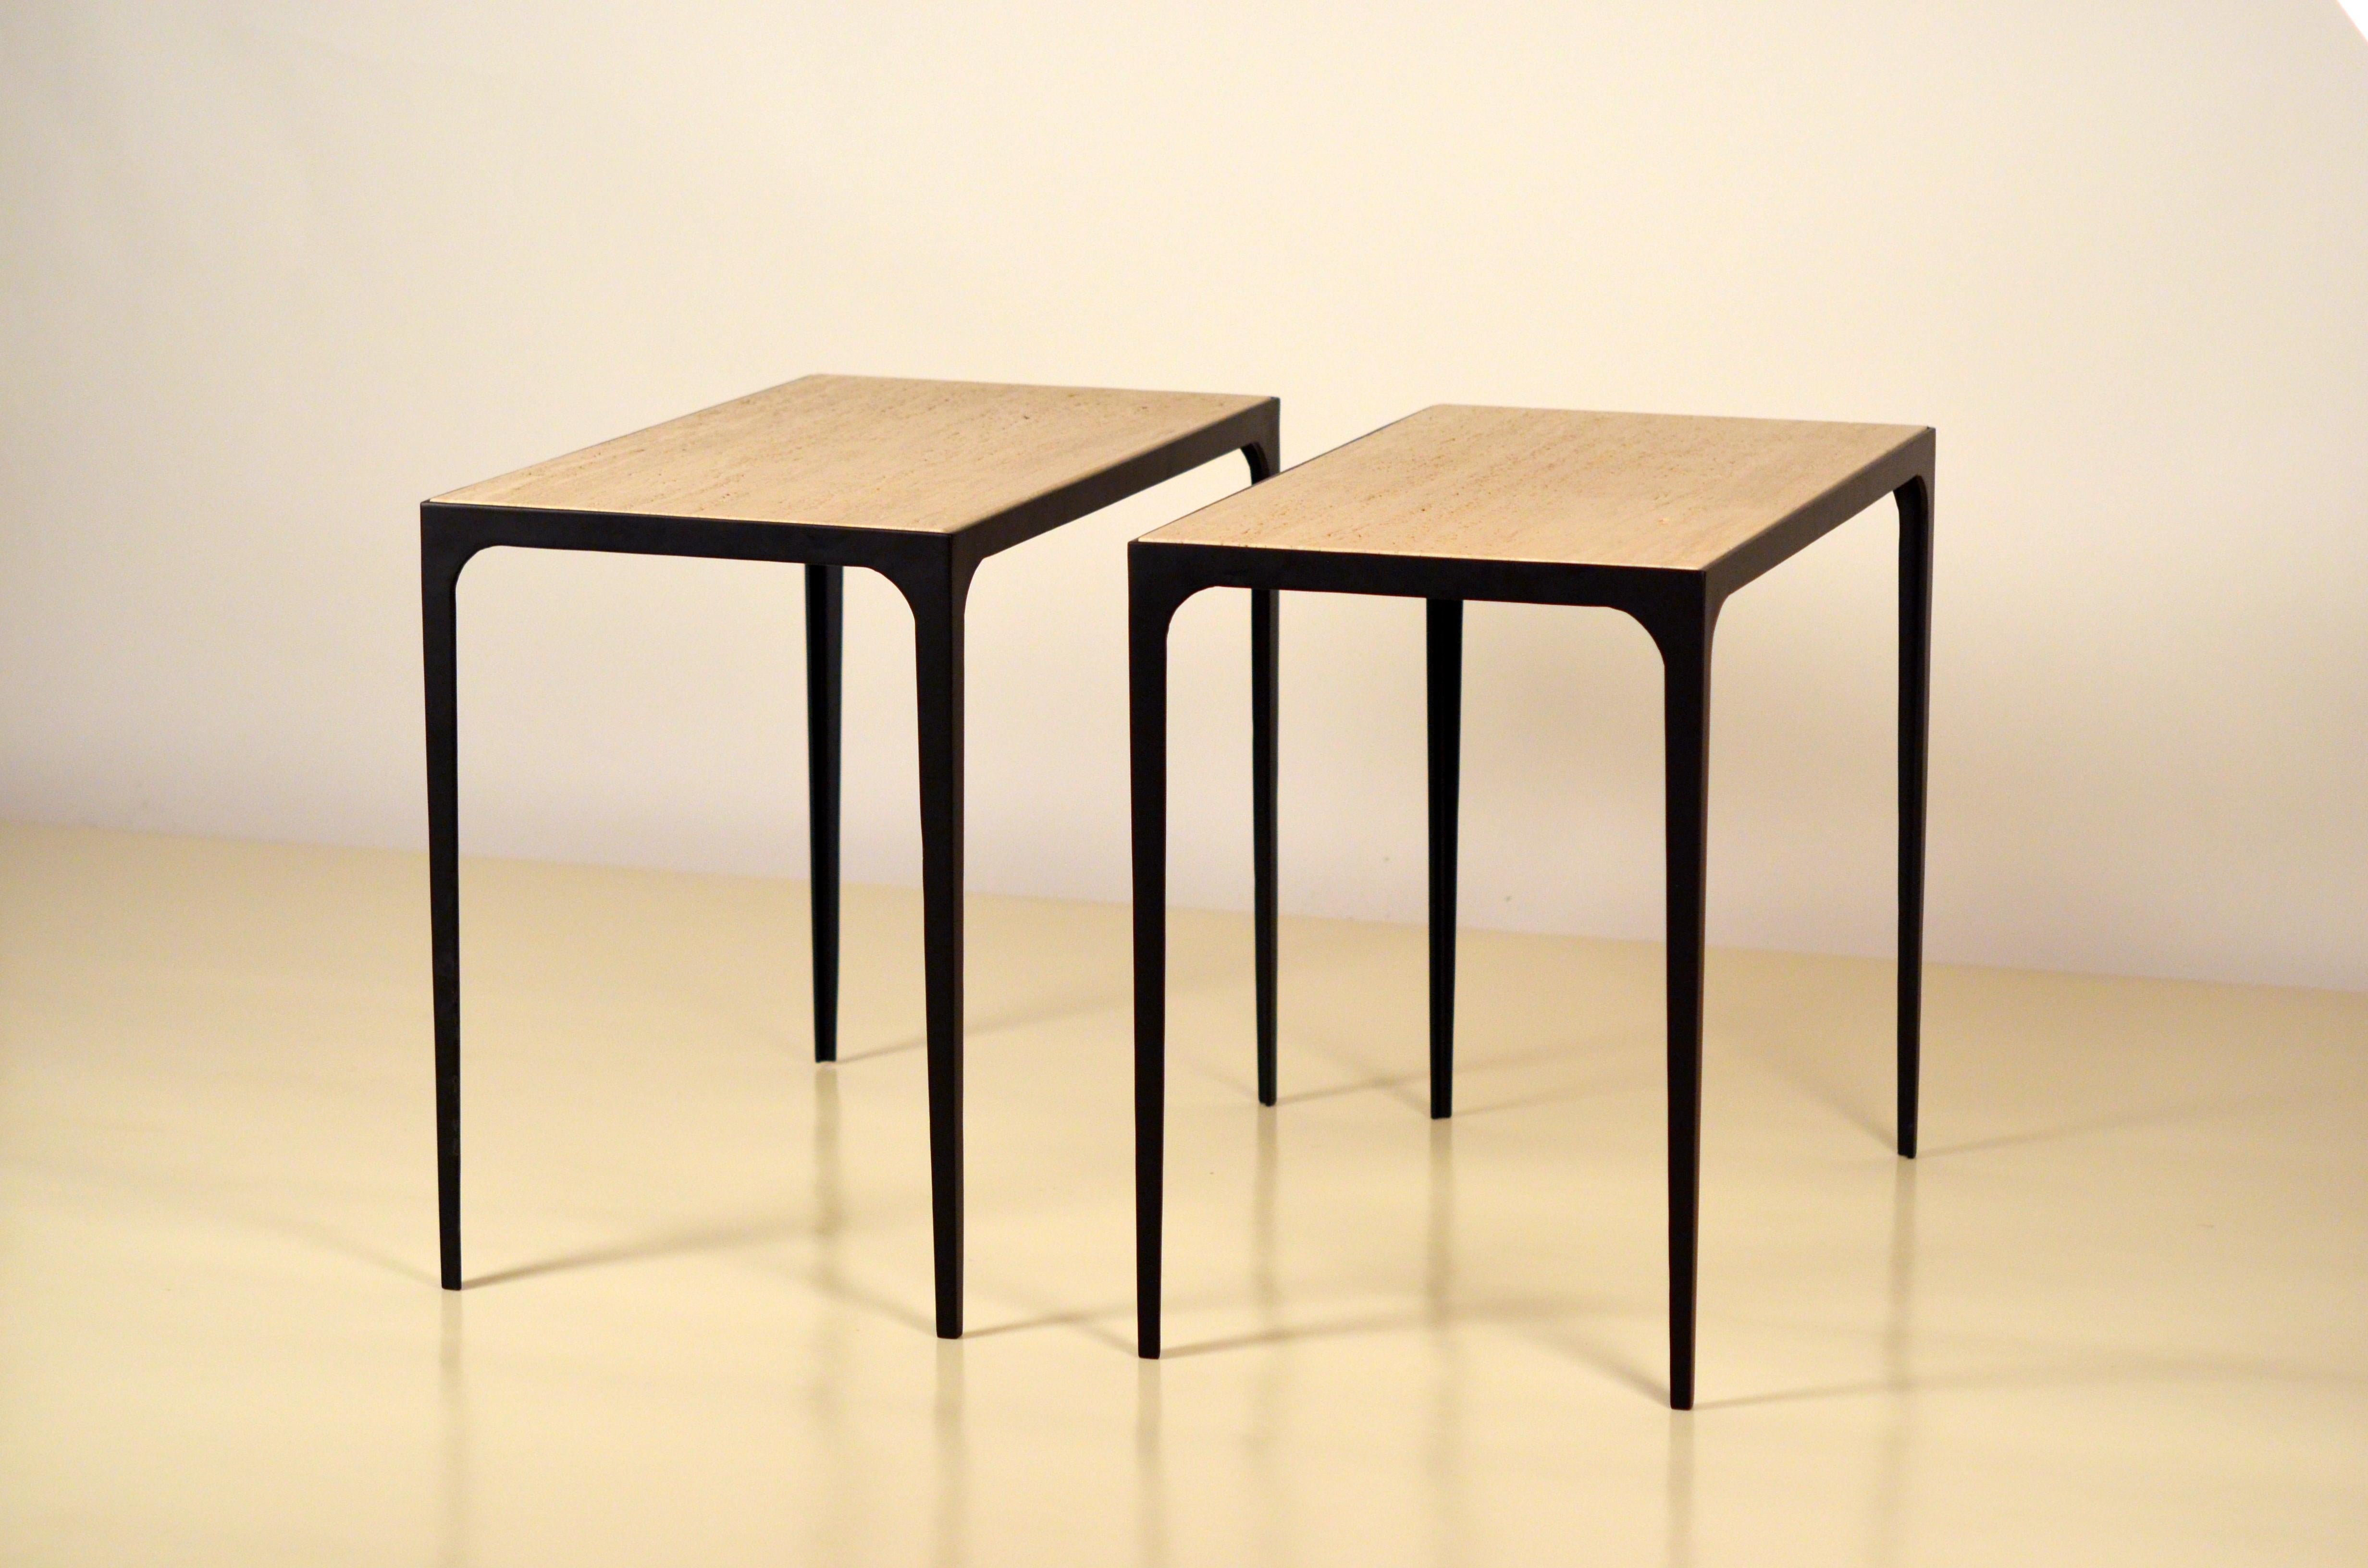 Pair of chic 'Esquisse' grooved ivory travertine side tables by Design Frères.